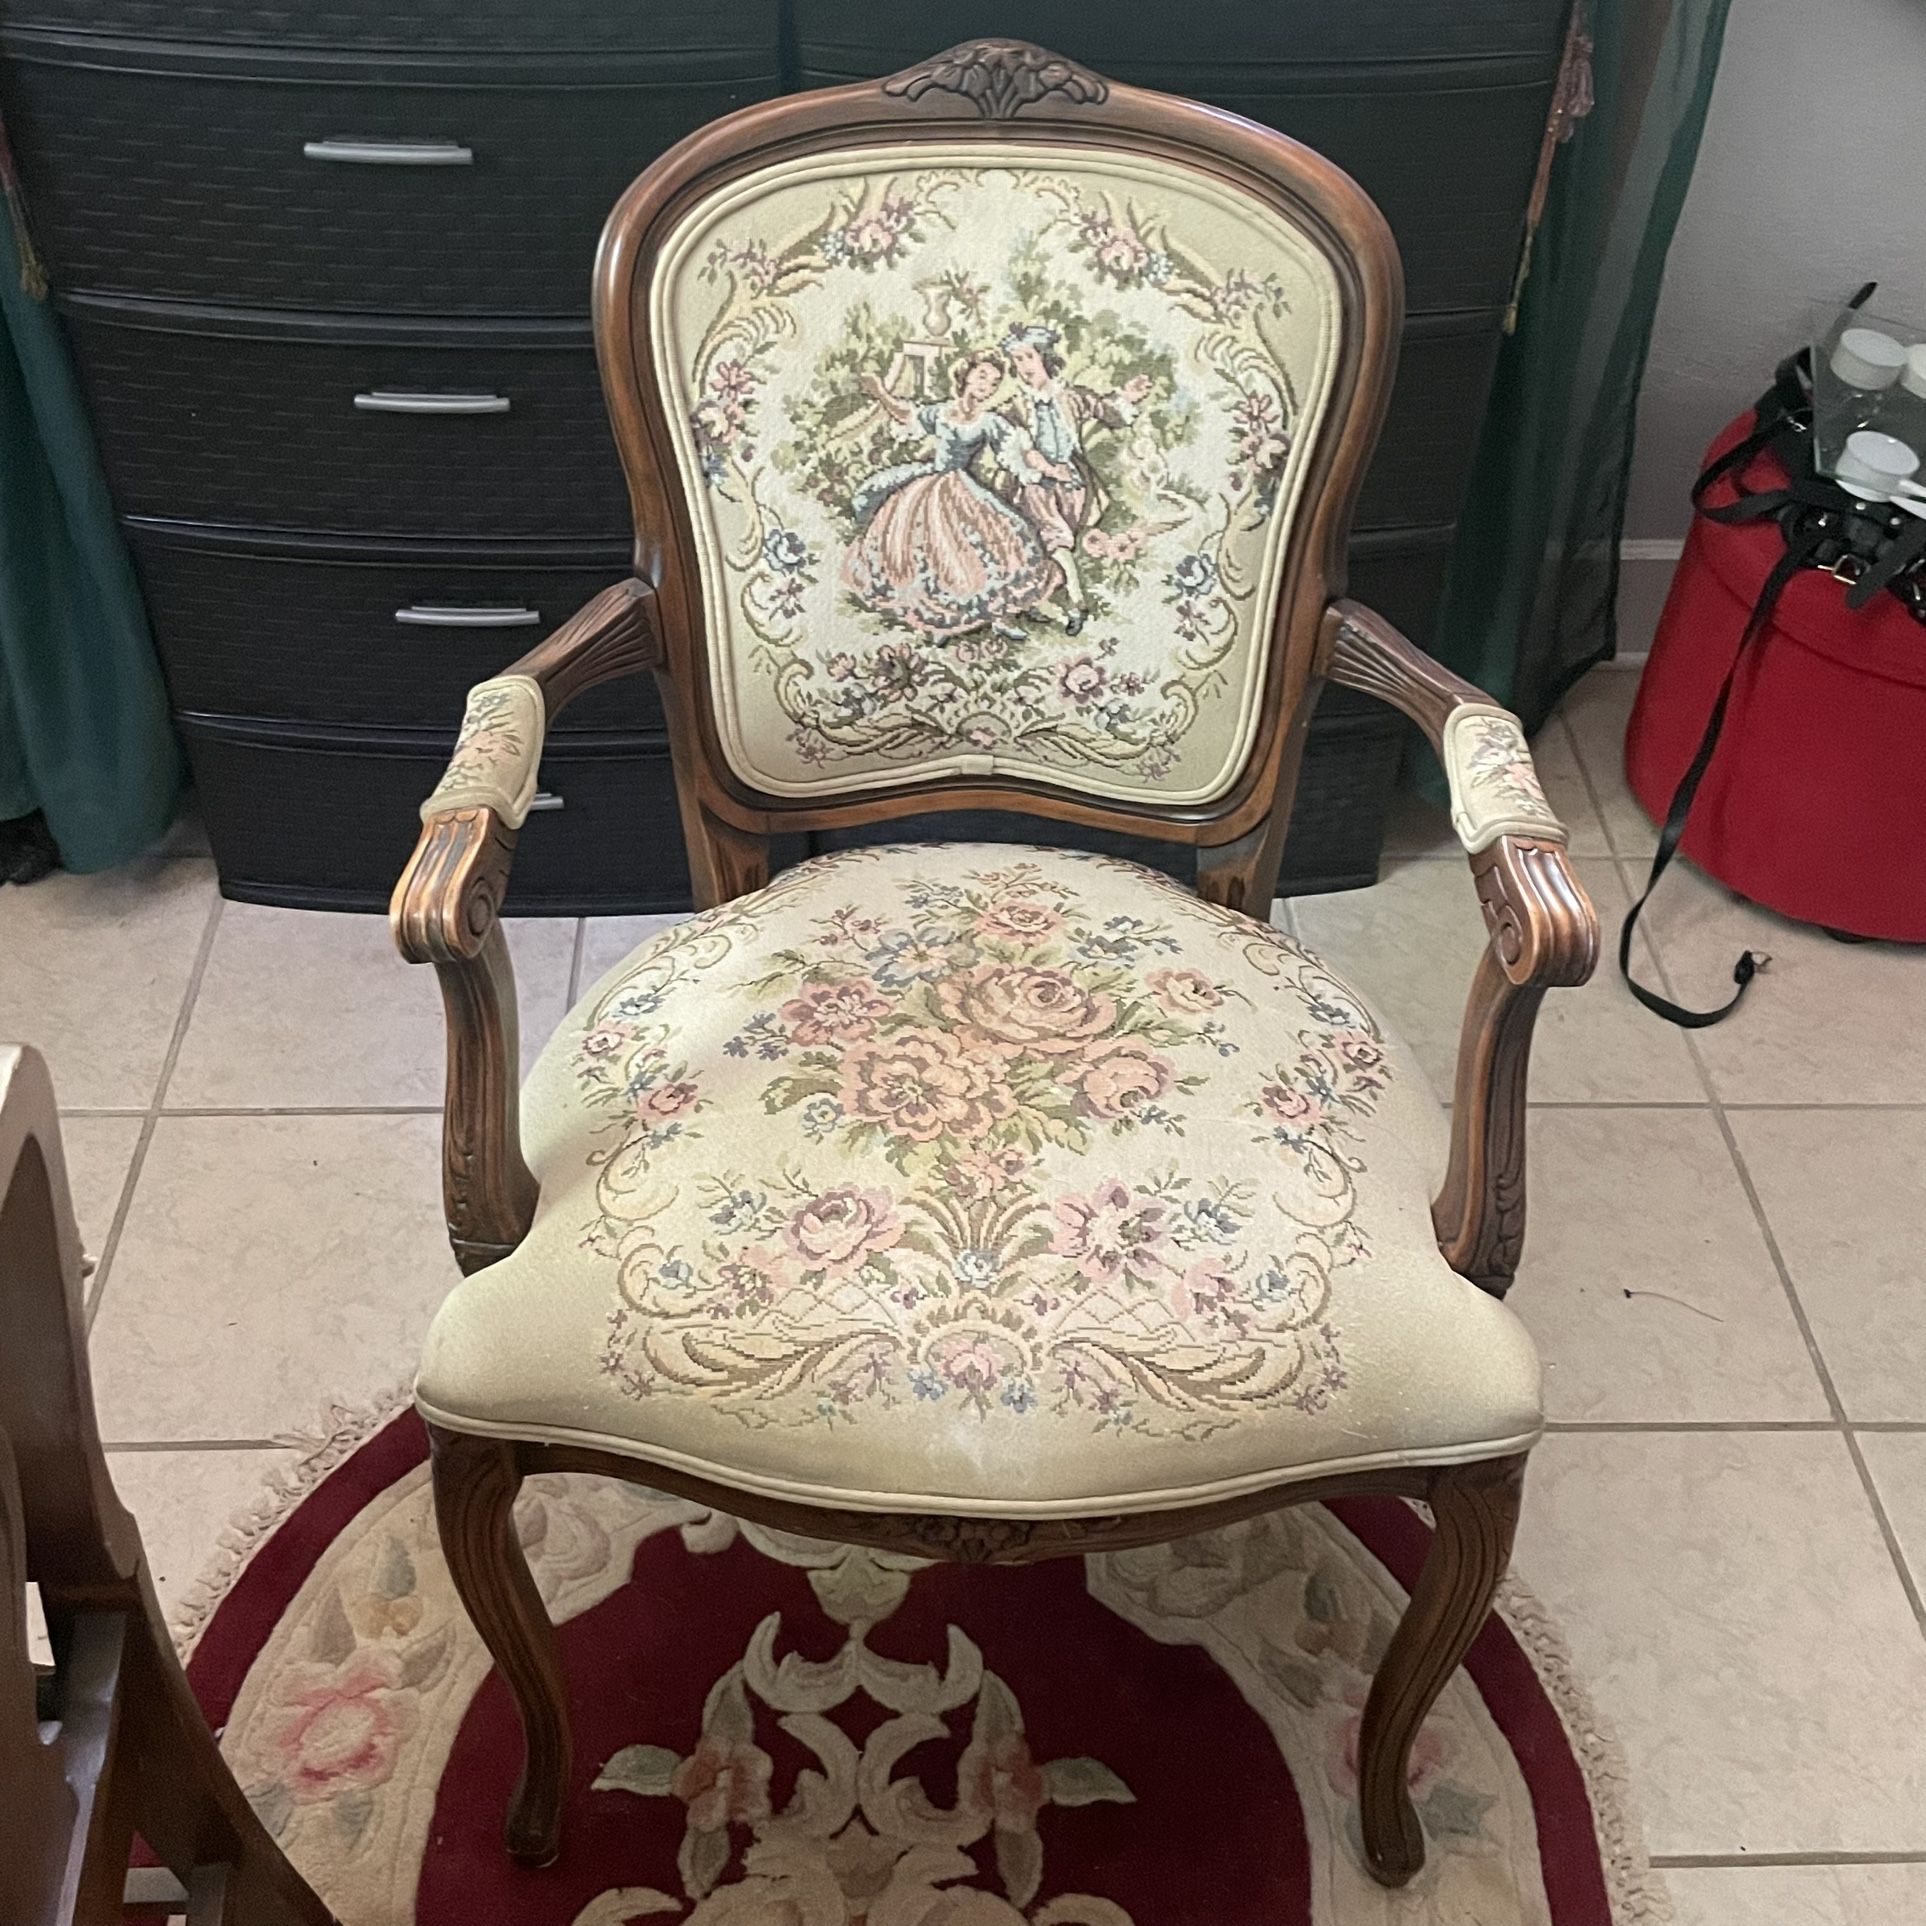 Vintage antique accent chair ft Victorian couple & floral details. tapestry fabric on wood AVAILABLE